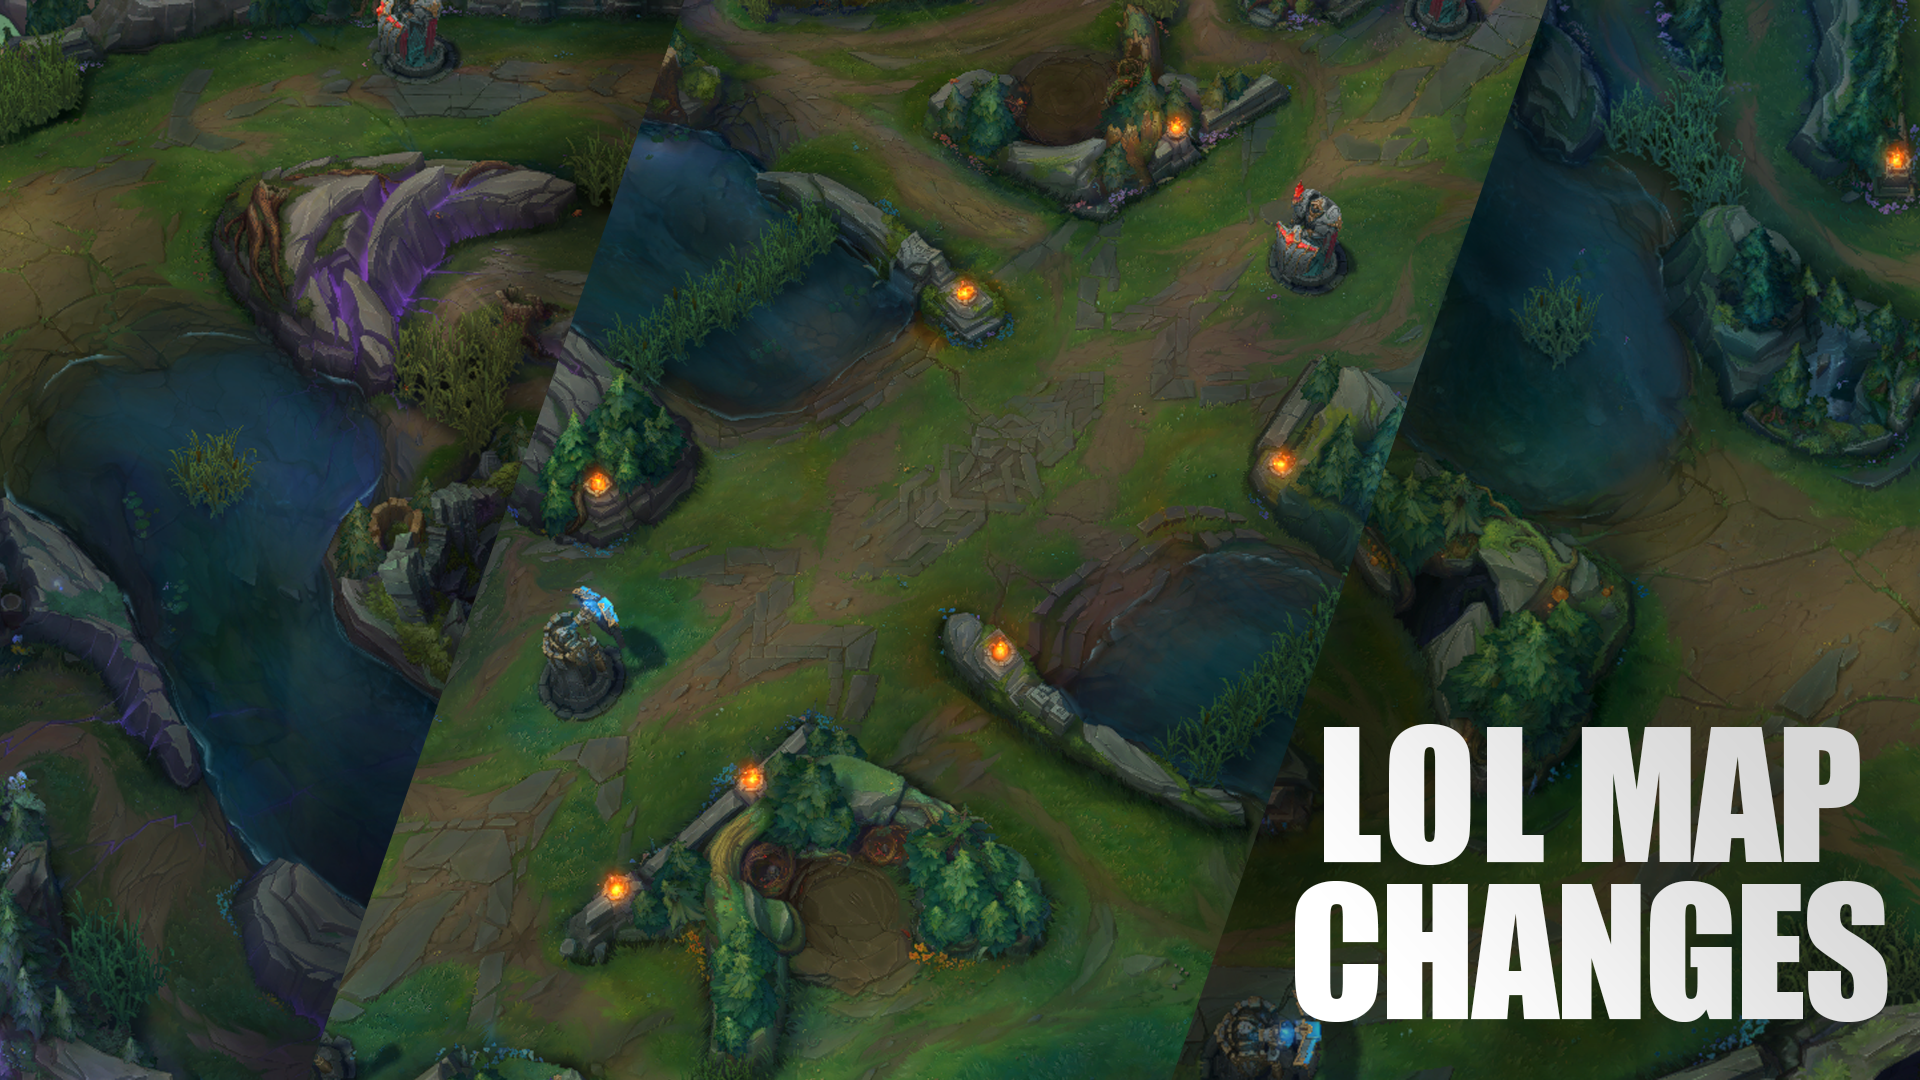 Patch 14.1 brings some of the biggest updates to Summoner's Rift and its creatures that we've seen in years. The Rift will look noticeably different thanks to changes aimed at making the map more balanced between sides.